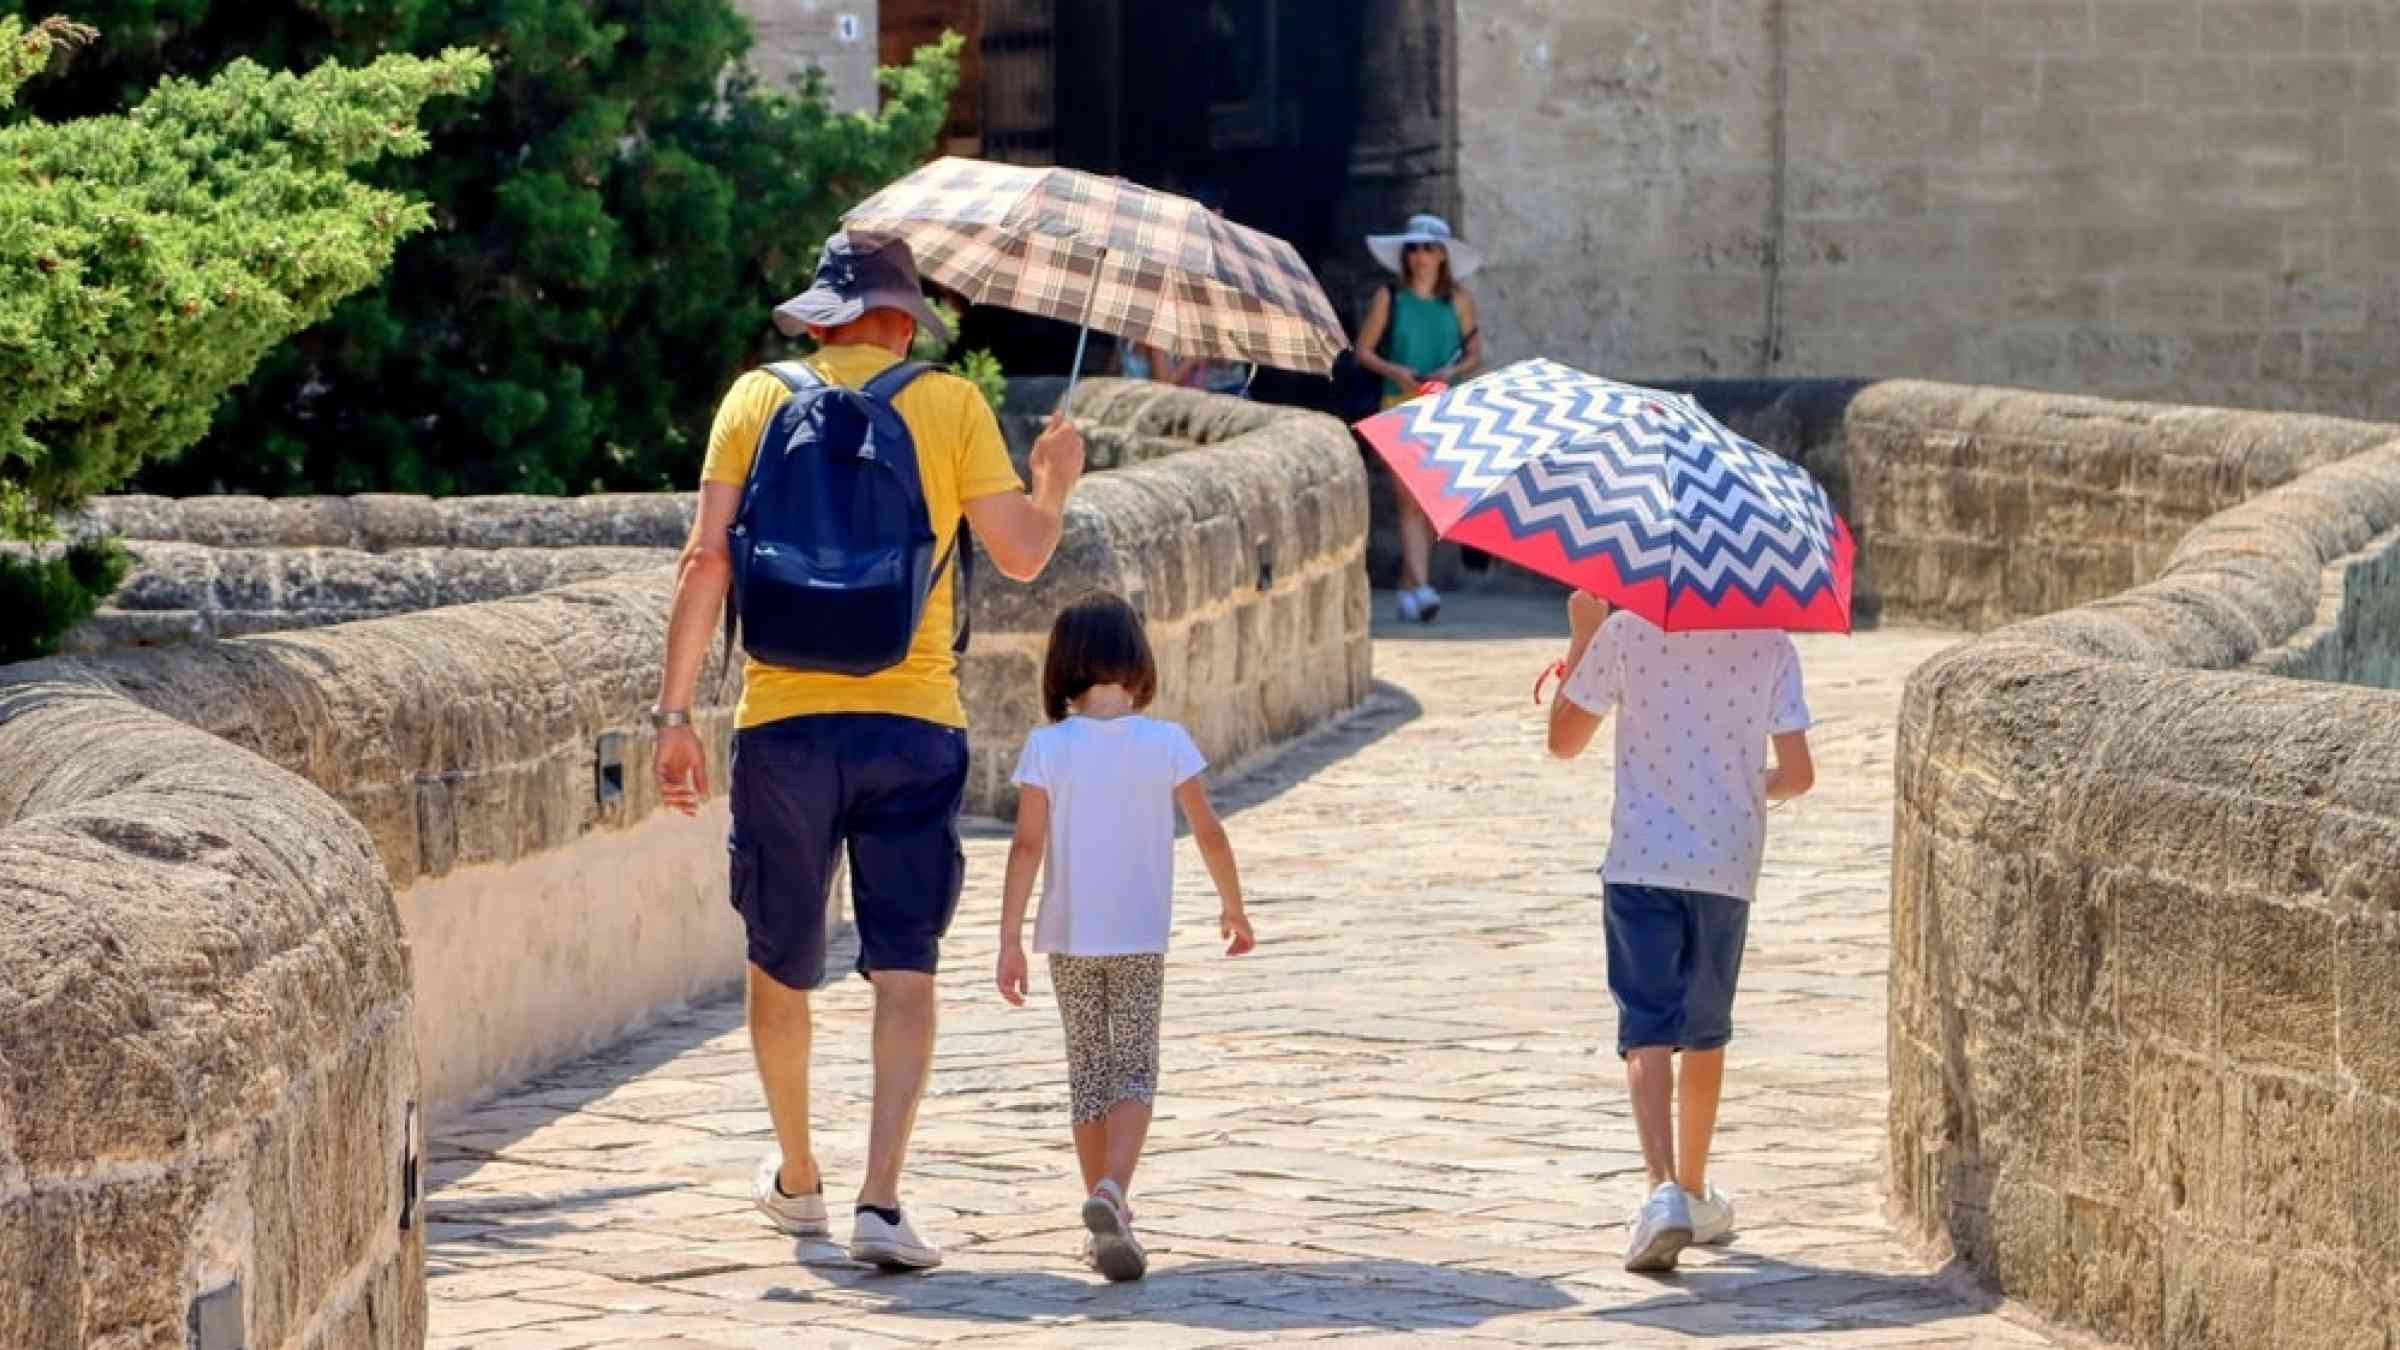 Father protects his children with umbrellas from the sun on a very hot day.